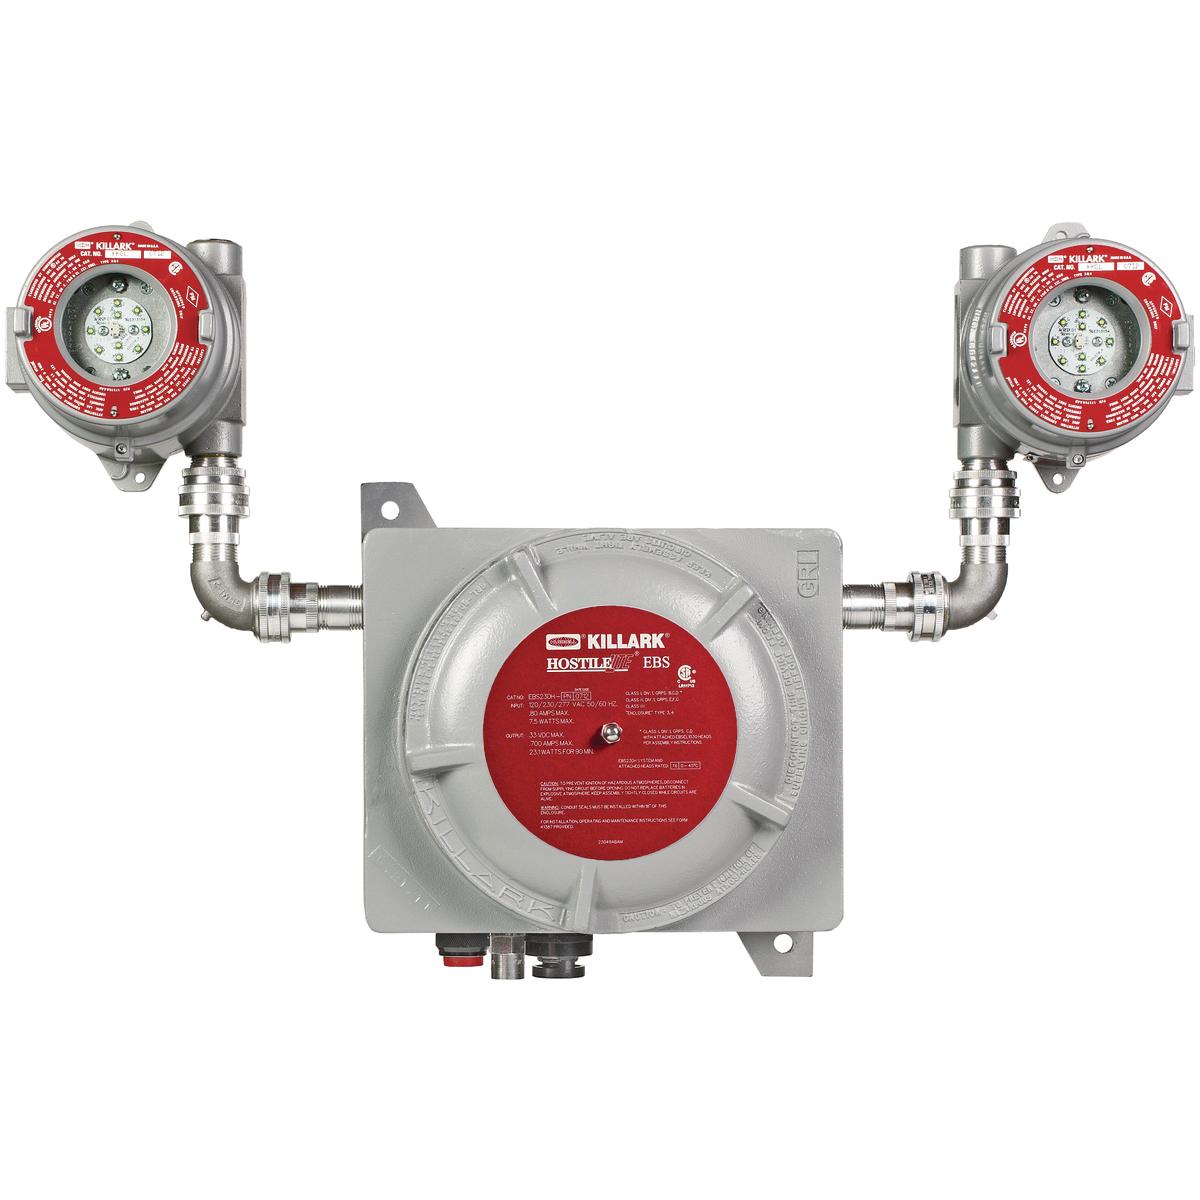 Hubbell EBS23DH-PTA The EBS Series Explosion Proof LED Emergency Battery Backup System is designed for egress or anti-panic applications. This fixture is made with a cast copper-free aluminum housing and fixture heads that are powder epoxy powder coat painted for extra corro